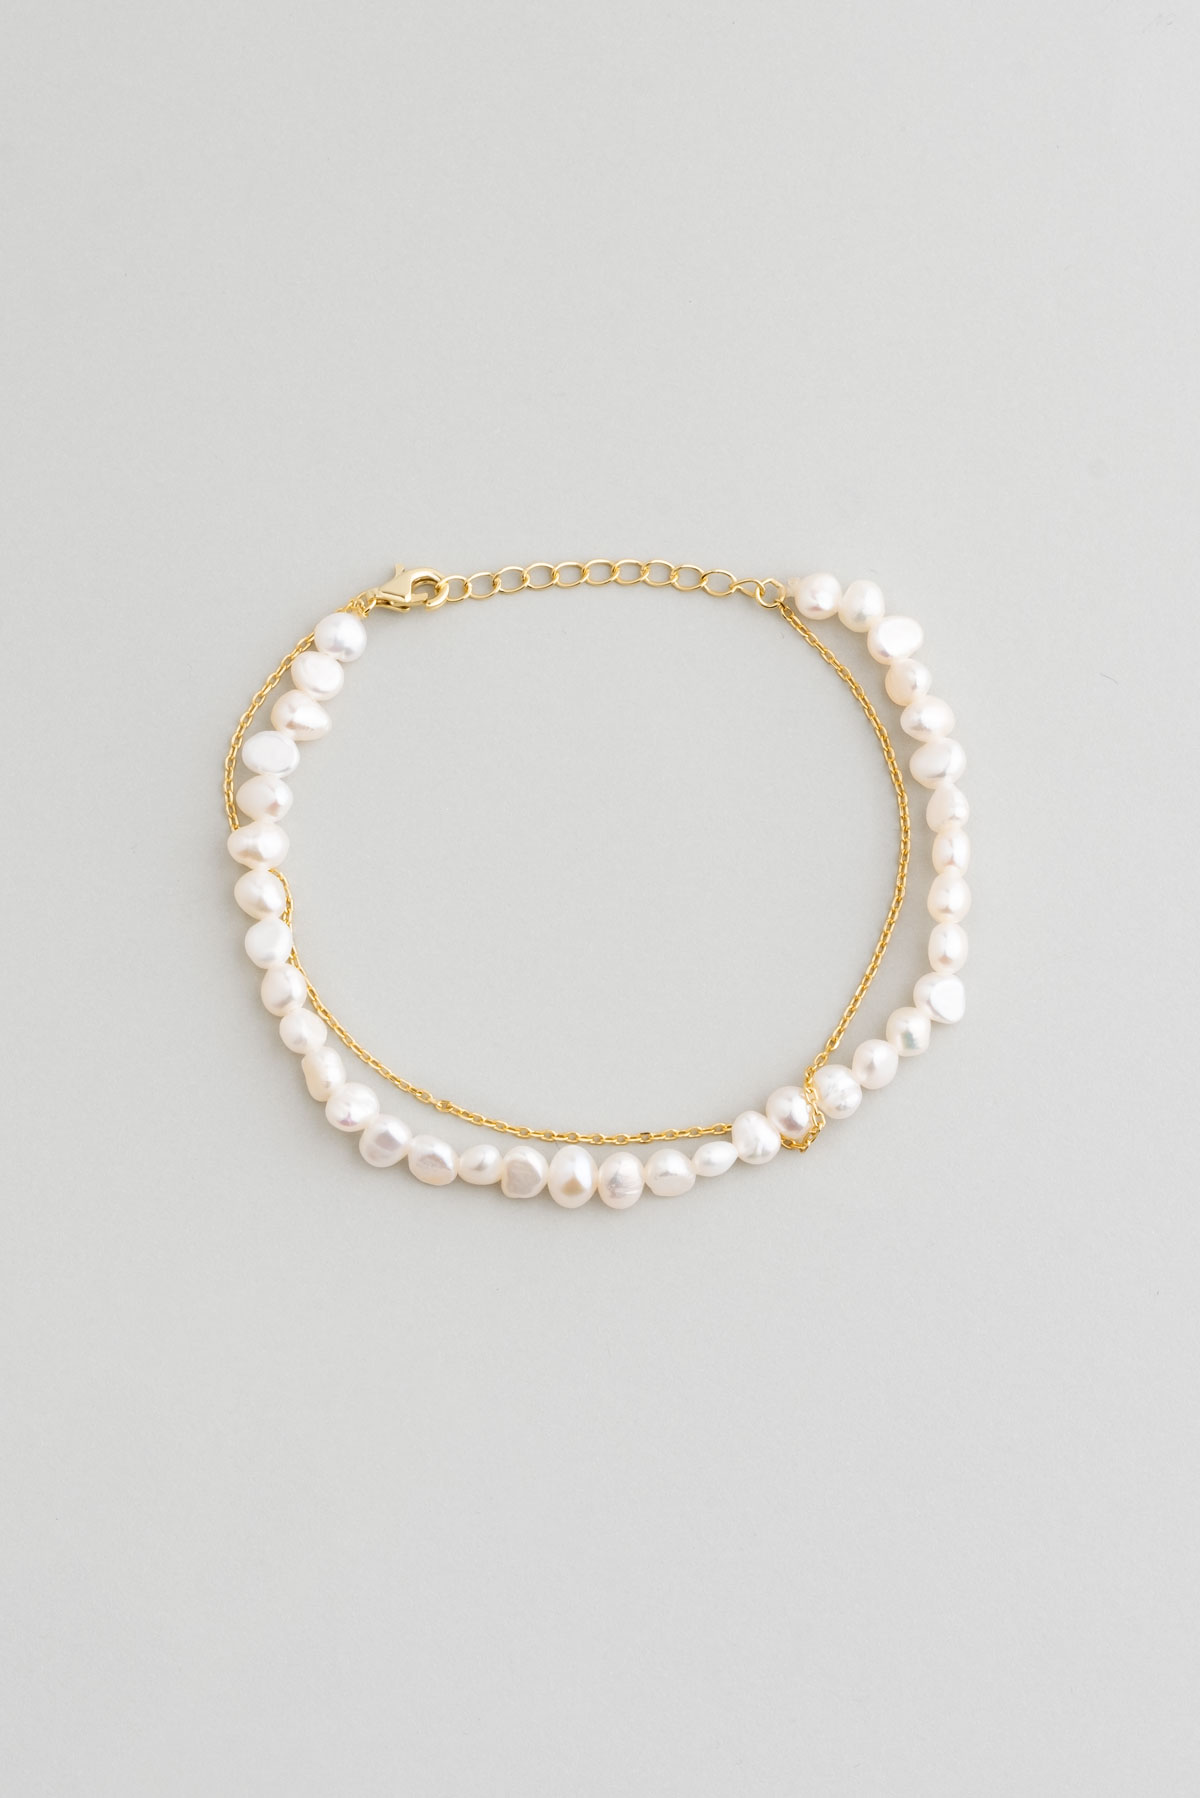 18 Karat Yellow Gold Plated Silver Pearl Bracelet with Chain Detail